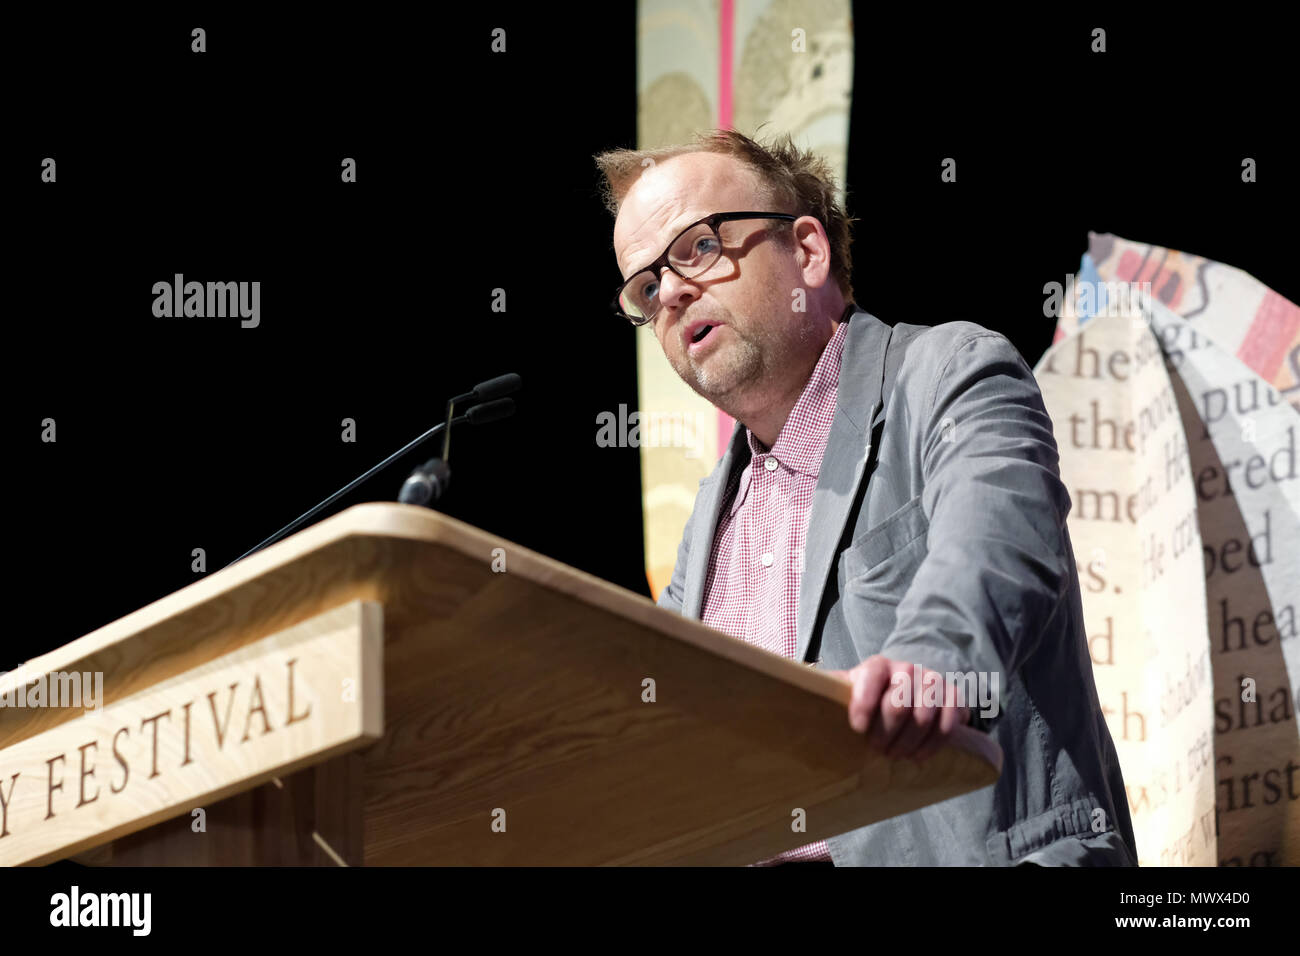 Hay Festival, Hay on Wye, UK - Saturday 2nd June 2018 - Actor Toby Jones reads a letter from playwright Harold Pinter during the performance of Letters Live 2018 - Photo Steven May / Alamy Live News Stock Photo